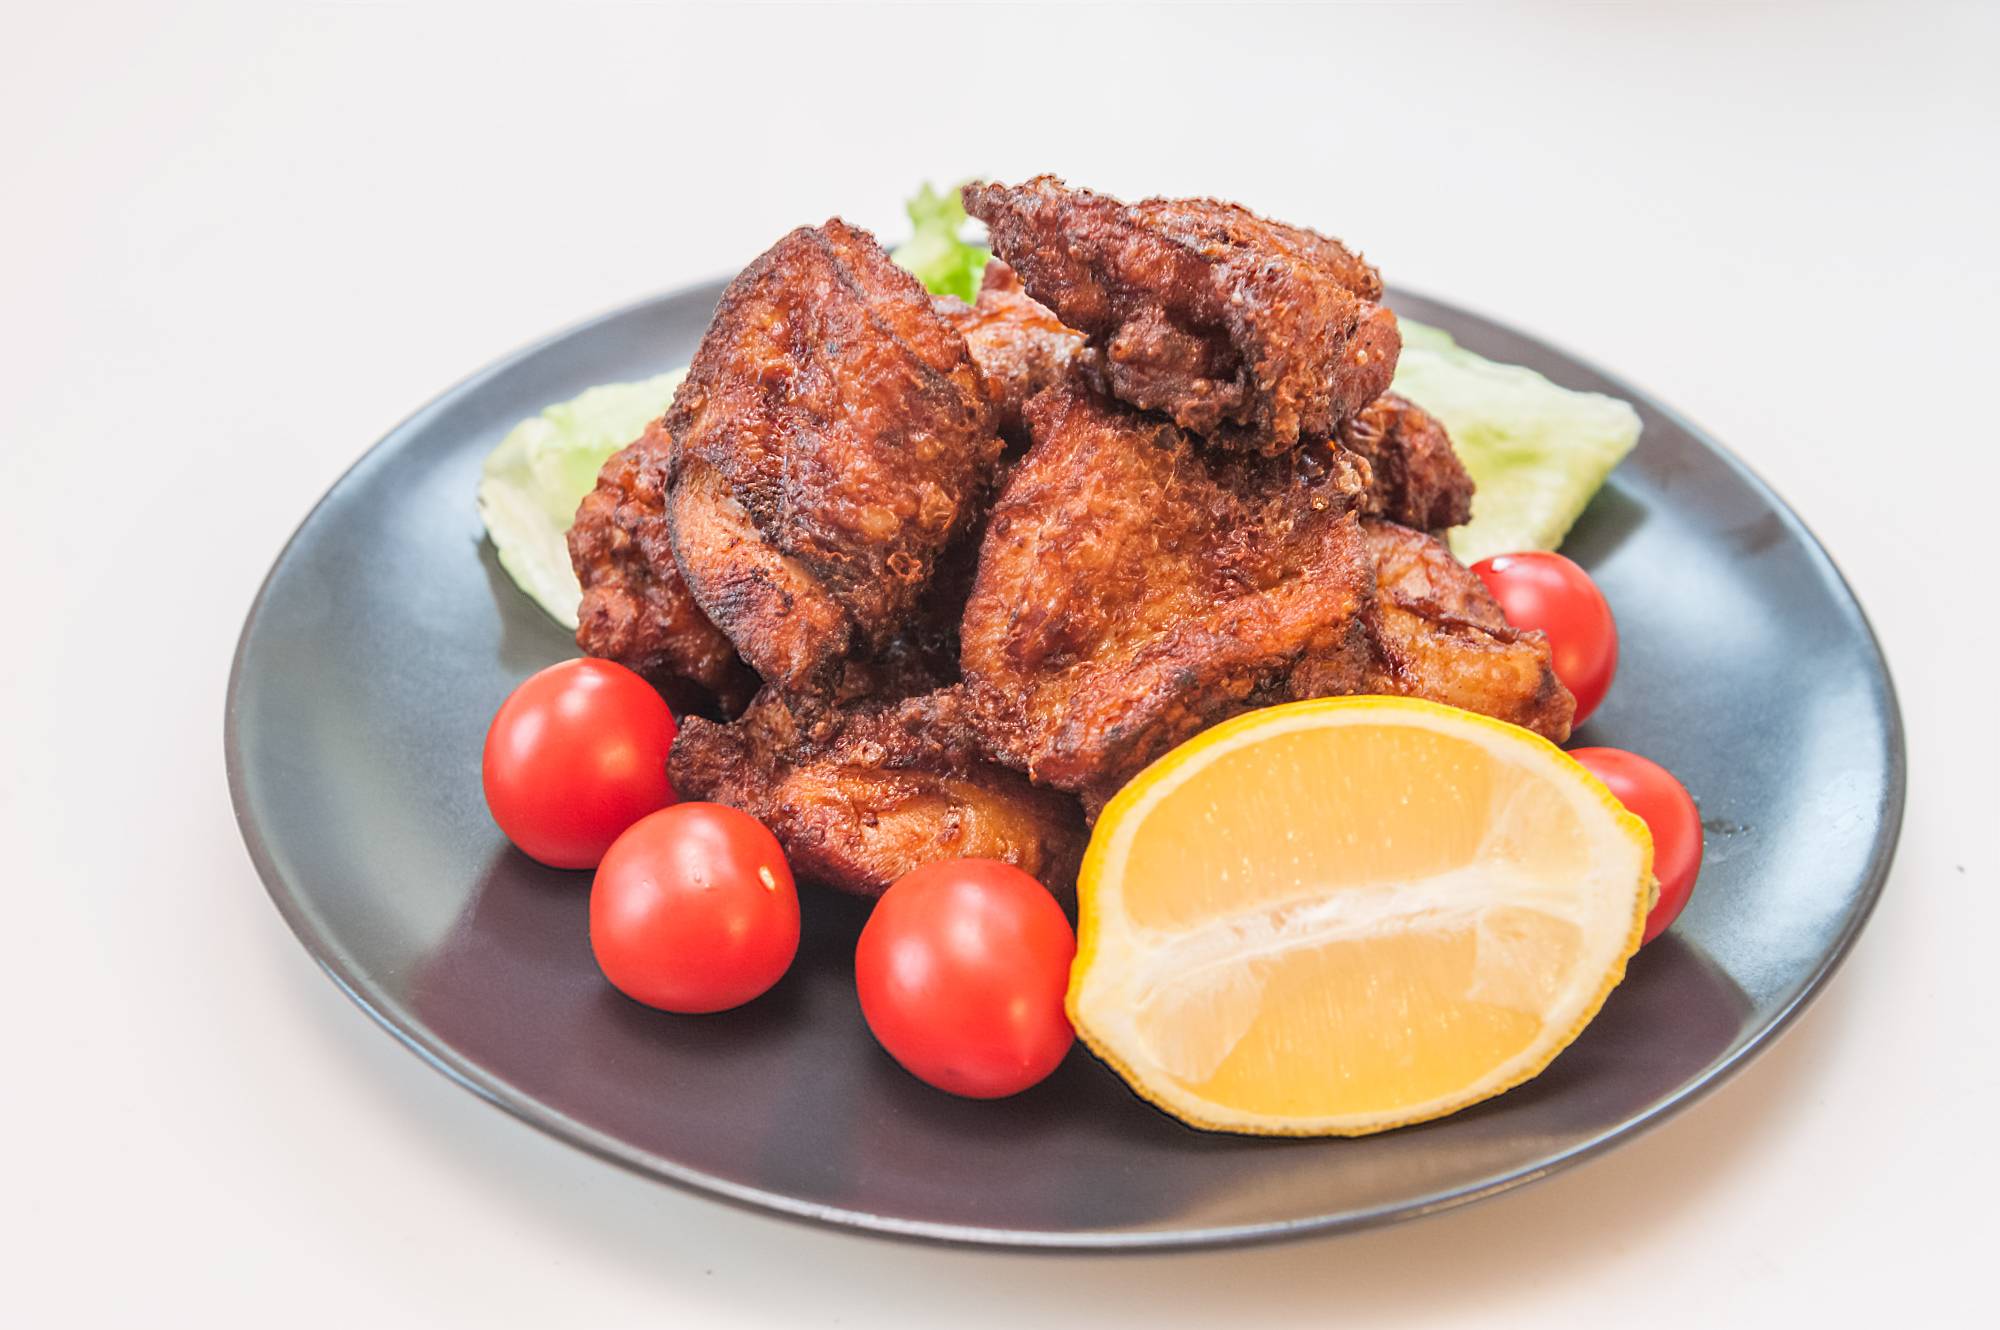 Double-fried: Zangi (Hokkaido-style fried chicken) is marinated in a slightly sweet sauce. Top with lemon juice when serving. | MAKIKO ITOH